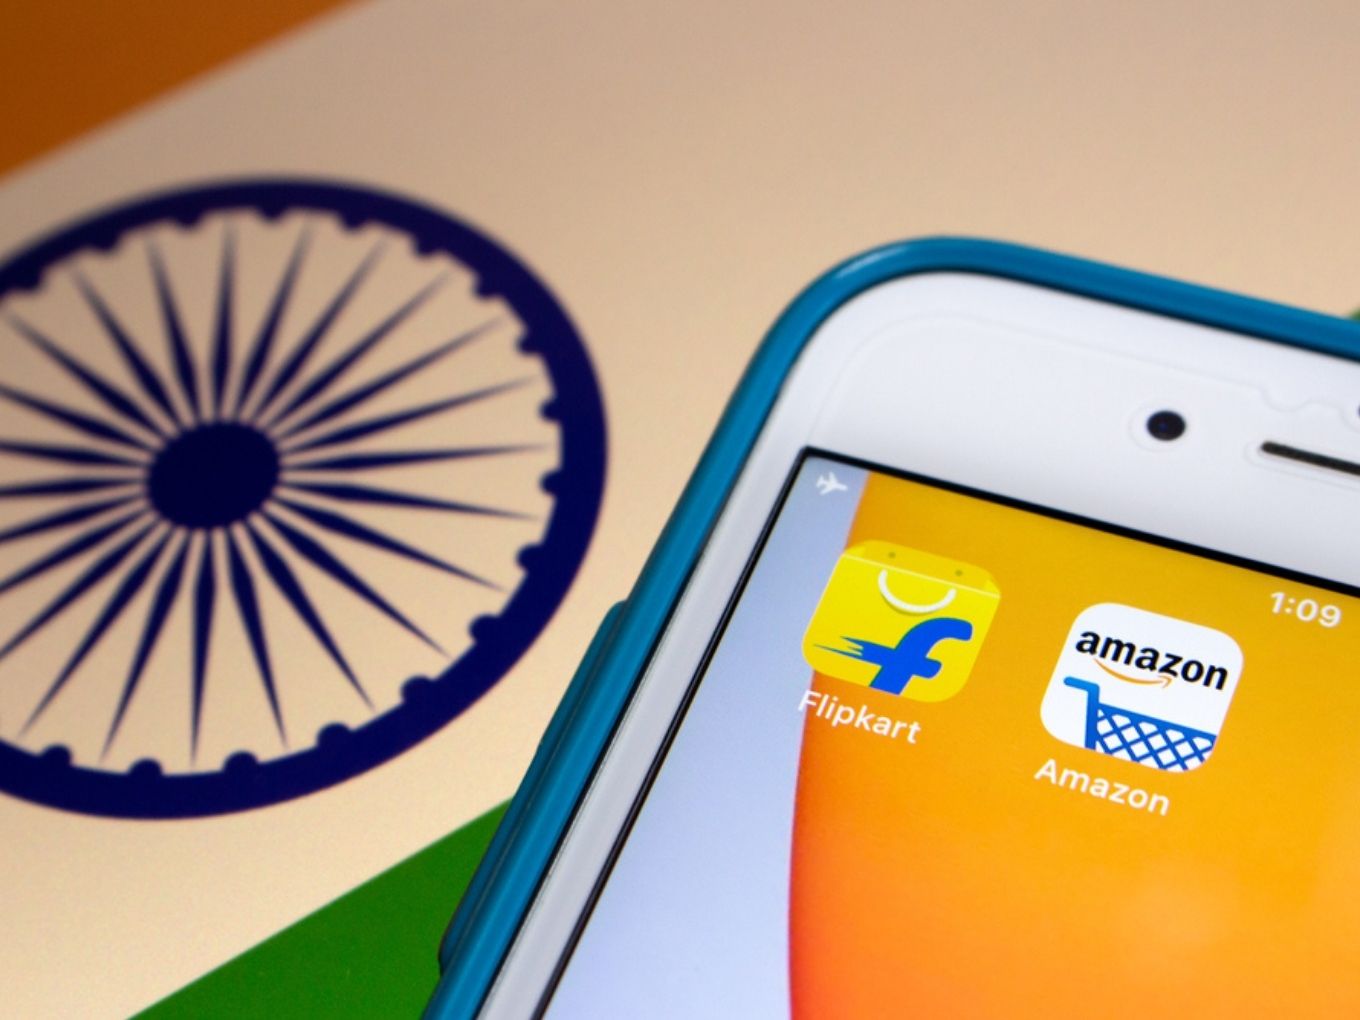 RBI, ED Asked To Initiate Action Against Amazon, Flipkart For Trade Policy